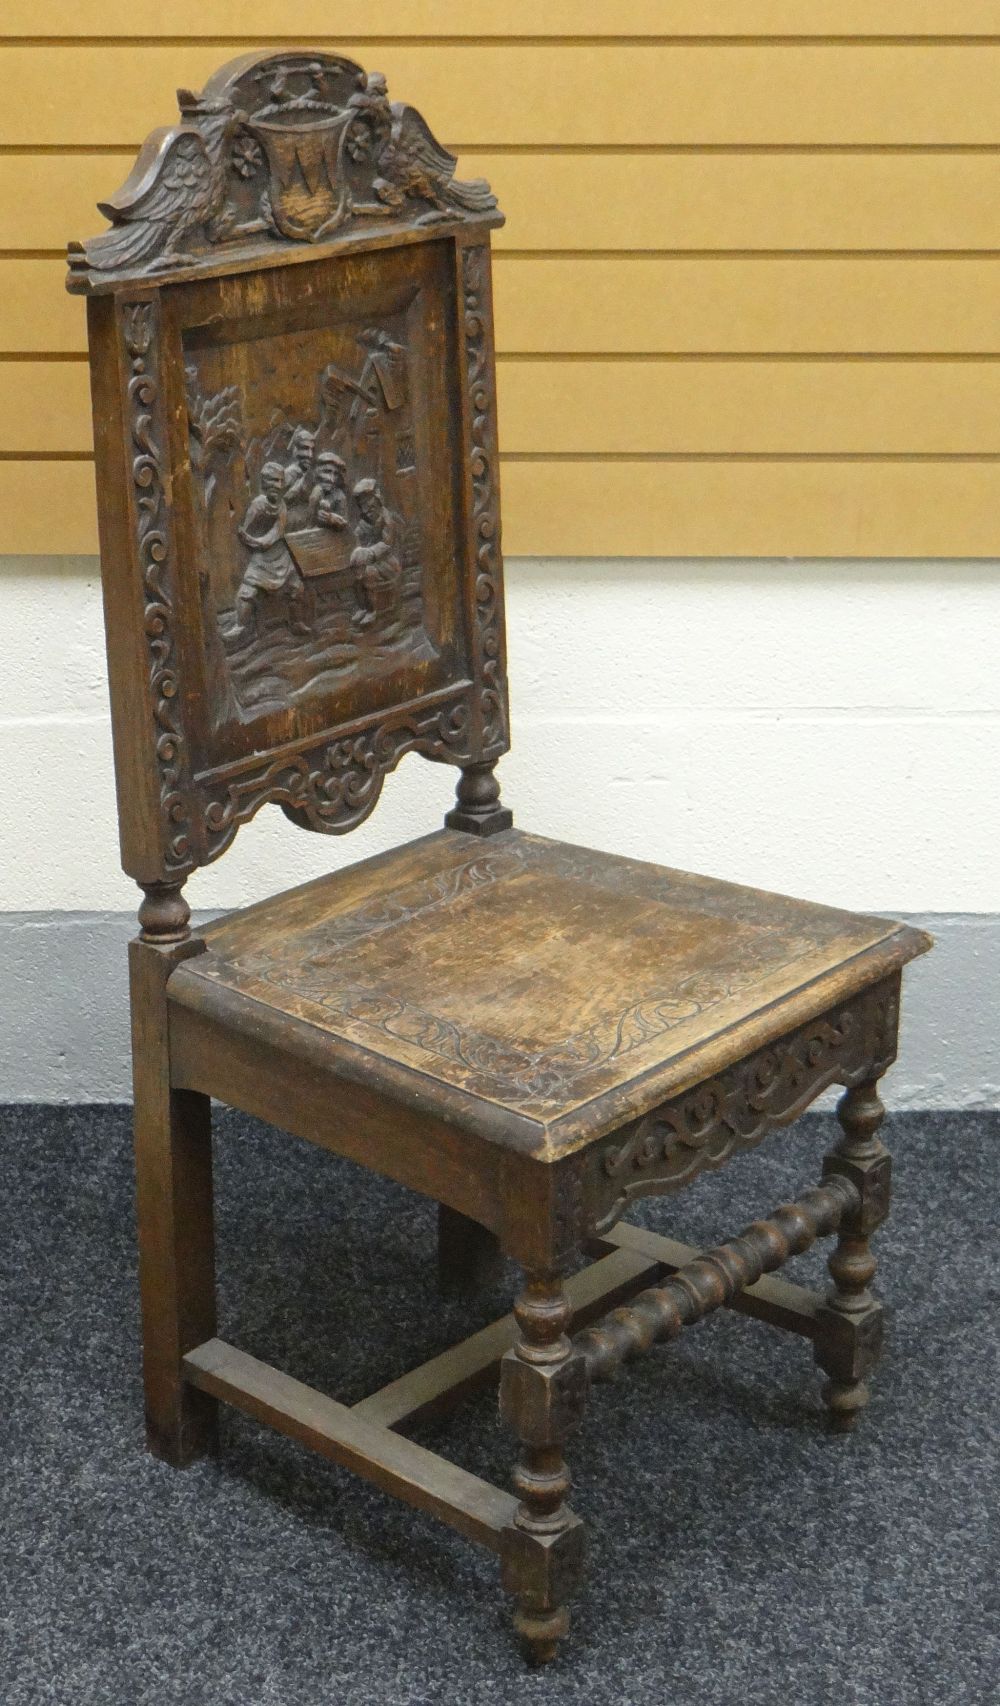 A PAIR OF CARVED OAK TAVERN SCENE CHAIRS with heraldic rails - Image 3 of 3